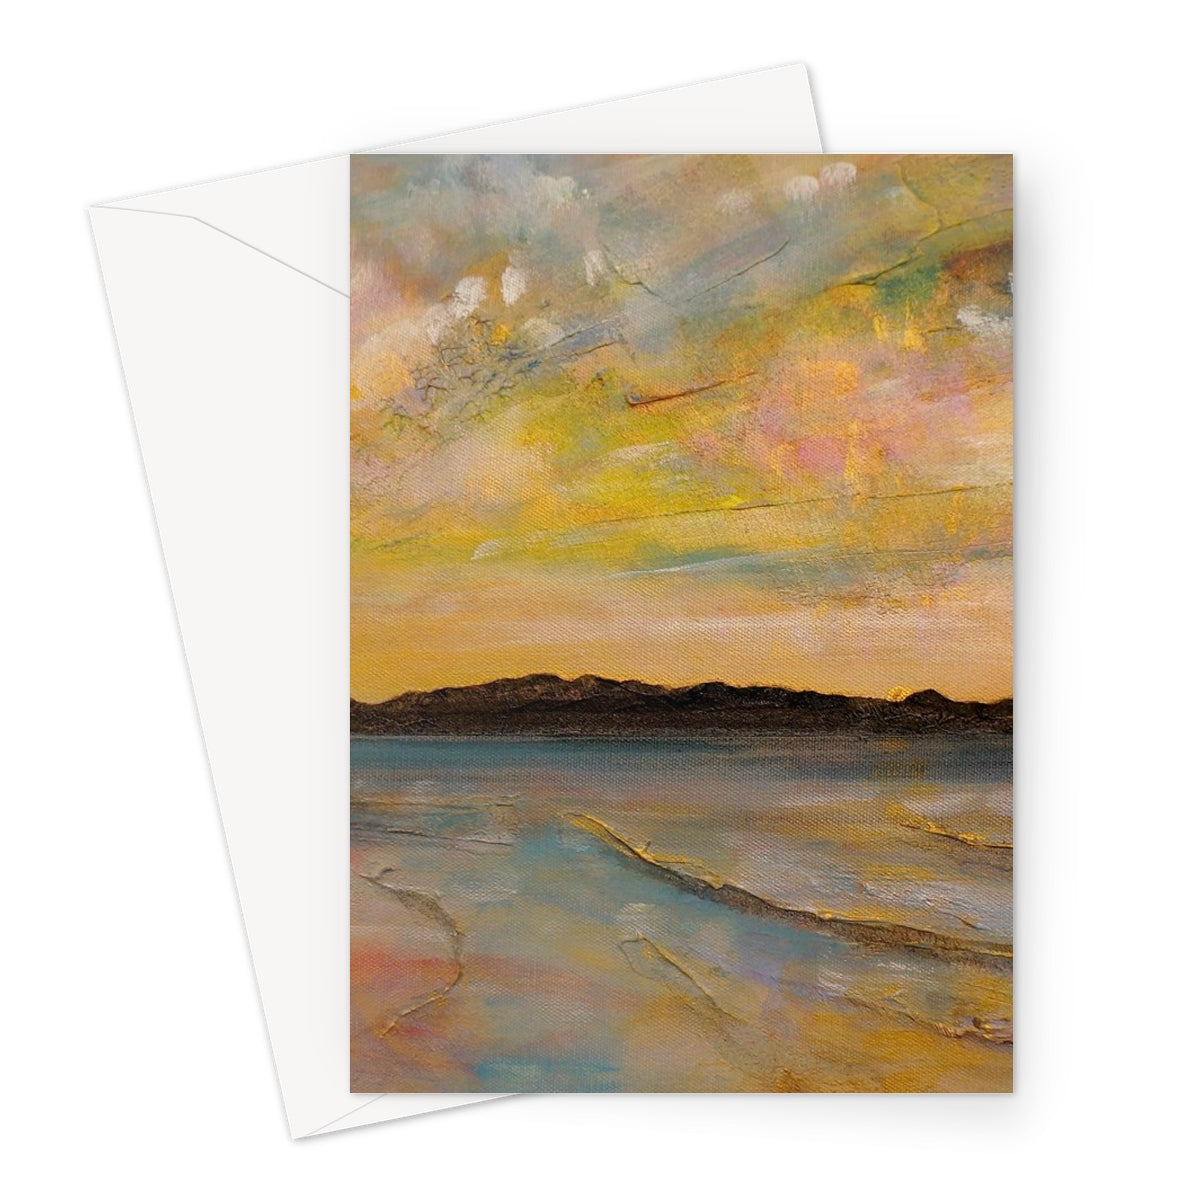 Vallay Island North Uist Art Gifts Greeting Card-Greetings Cards-Hebridean Islands Art Gallery-A5 Portrait-1 Card-Paintings, Prints, Homeware, Art Gifts From Scotland By Scottish Artist Kevin Hunter